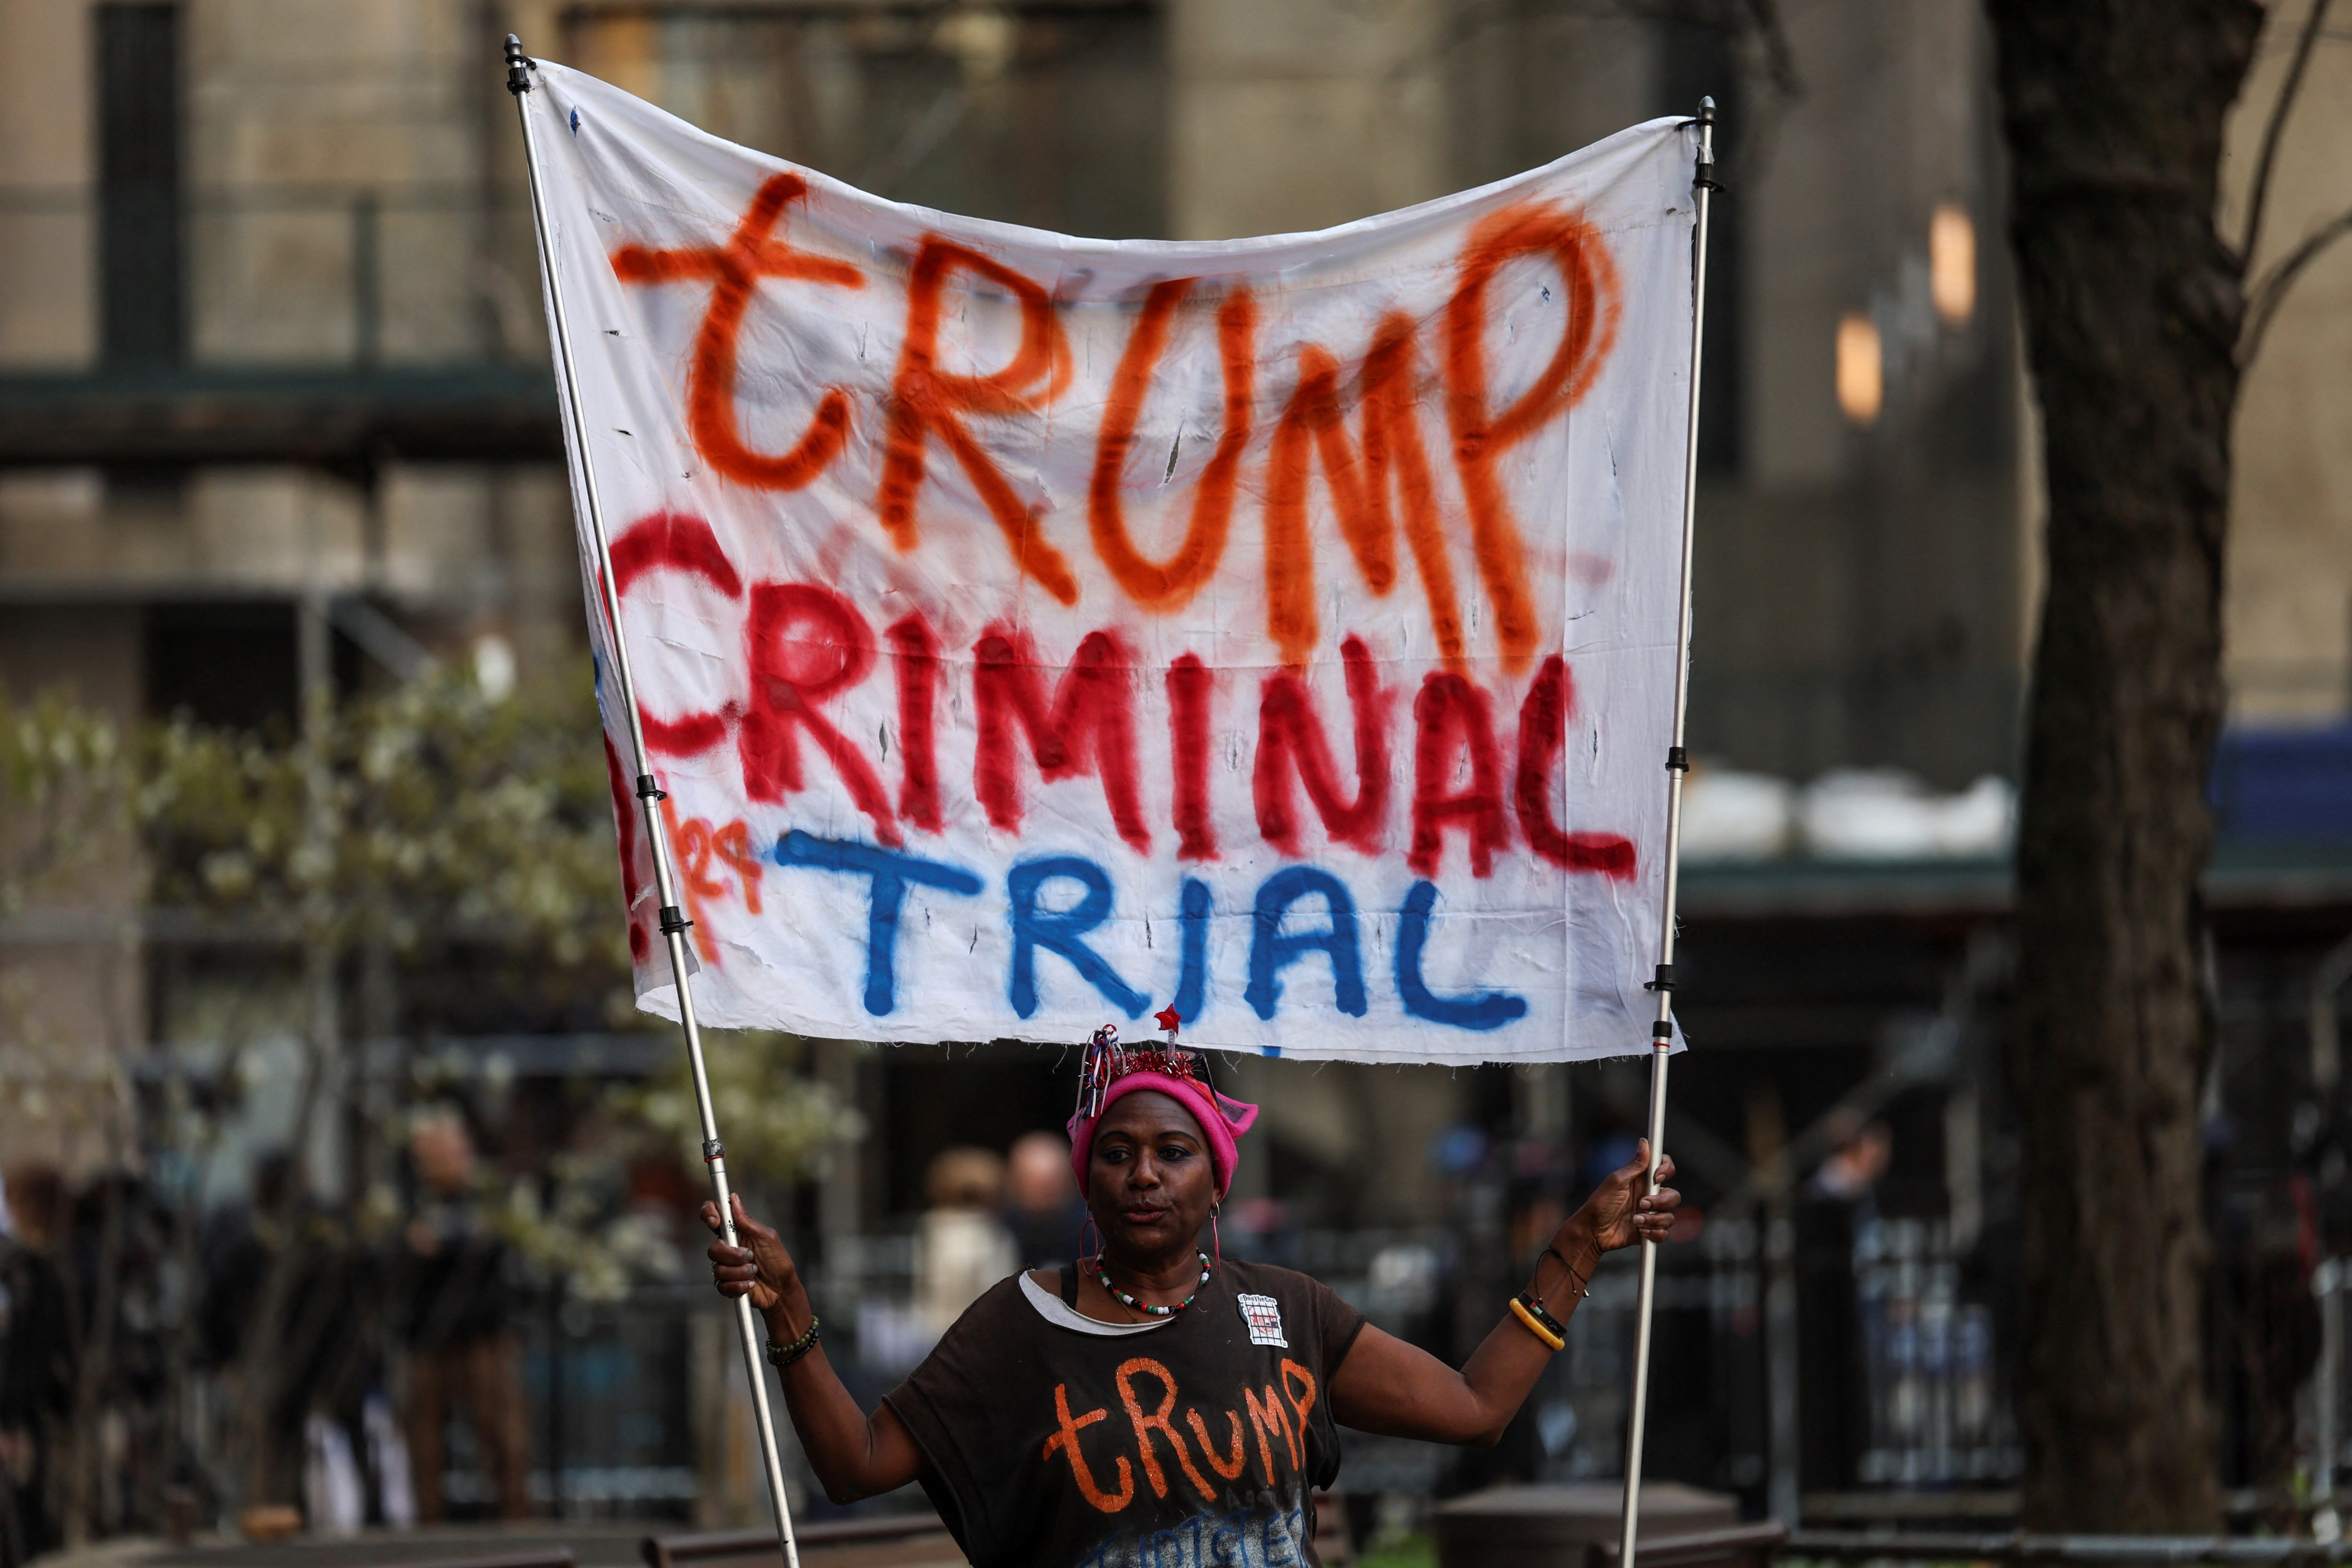 A protester stands outside the courthouse in New York ahead of Donald Trump’s trial